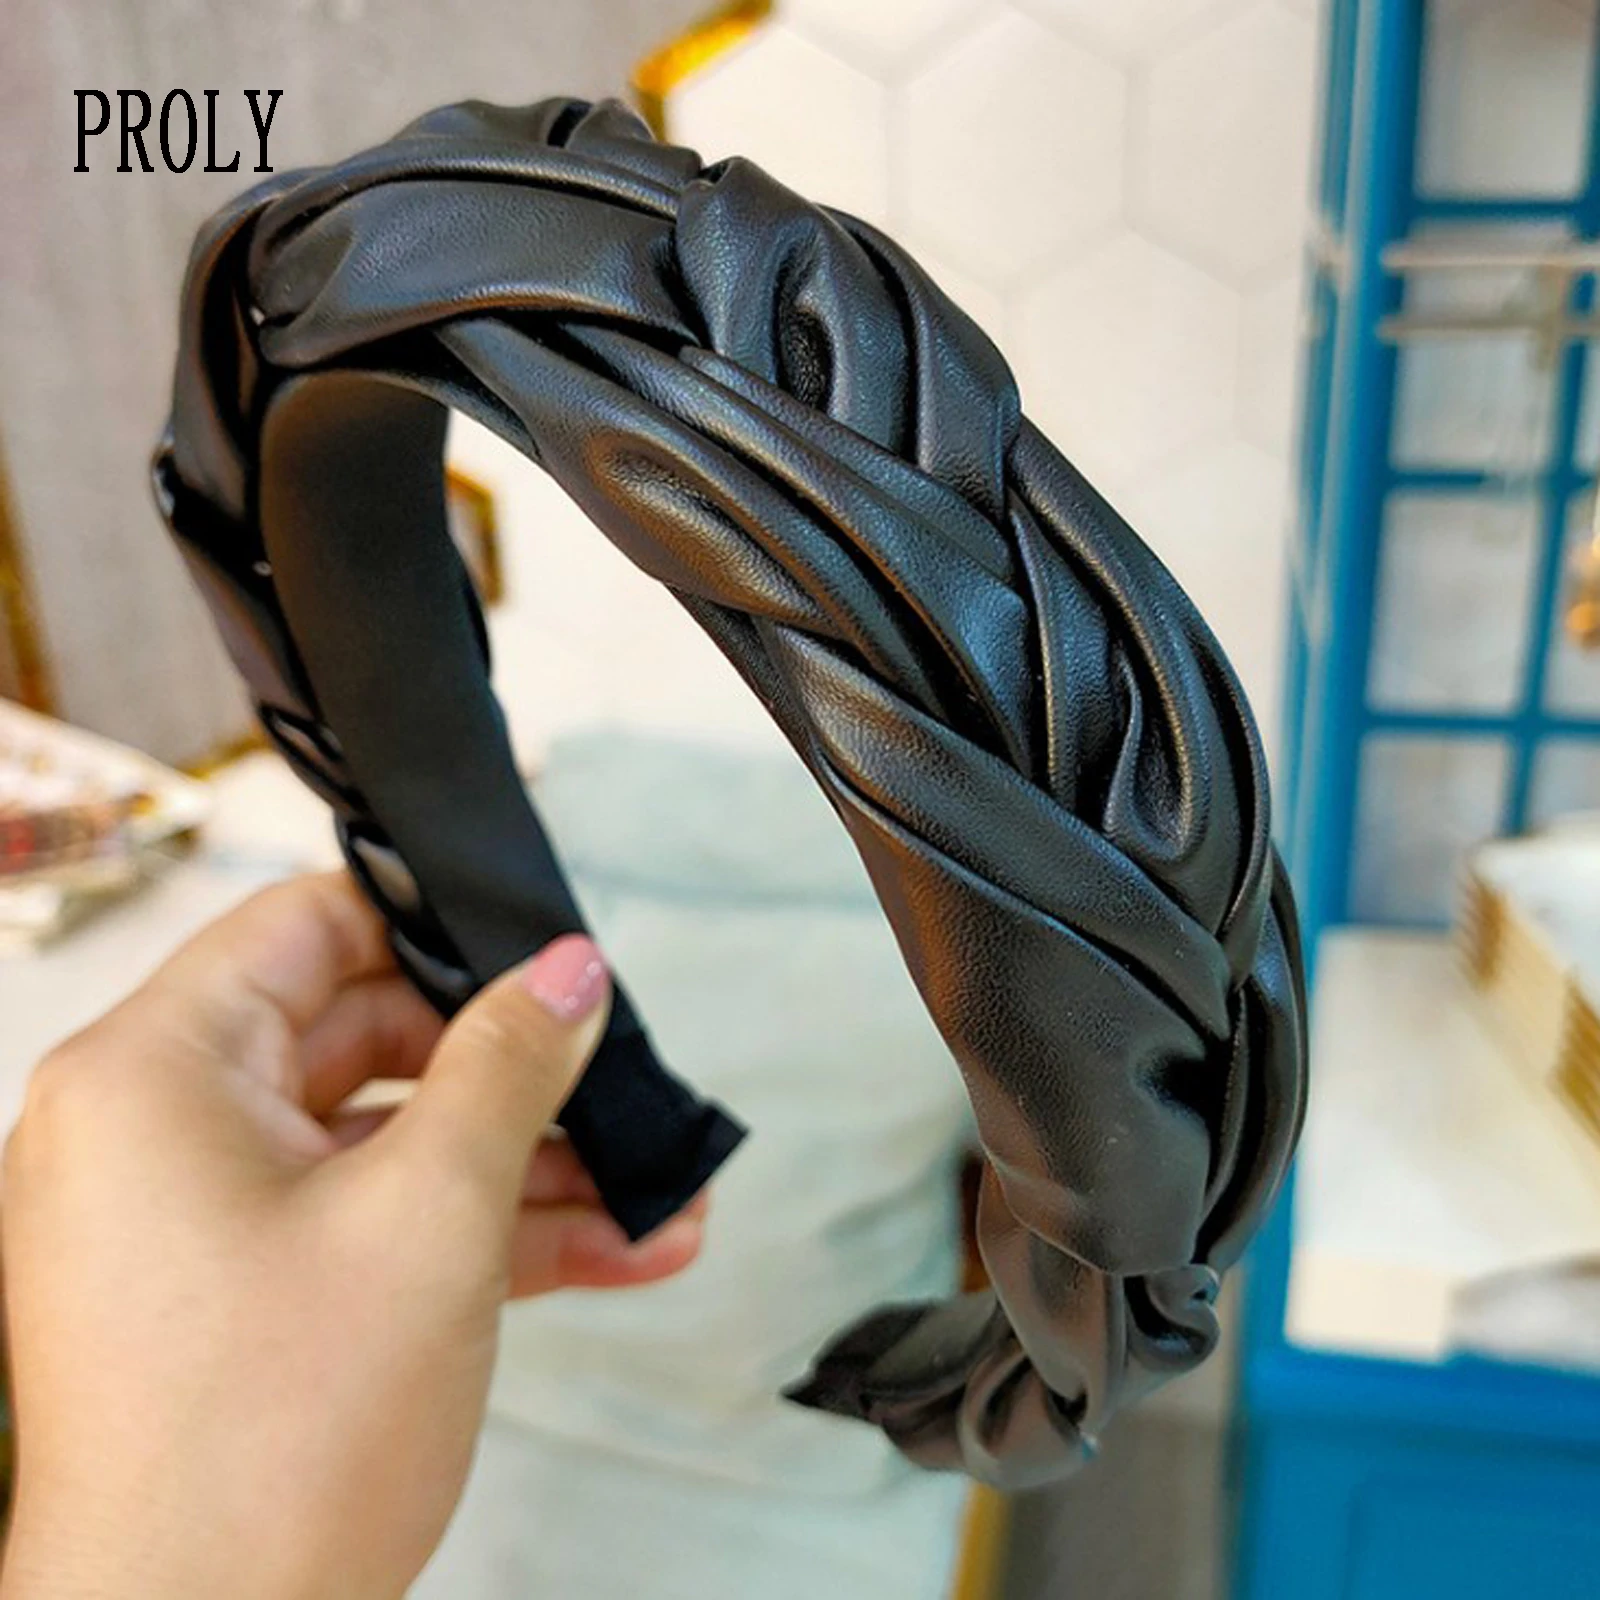 PROLY New Fashion Hair Accessories For Women Leather Hairband Cross Knot Braid Headband Adult Wide Side Headwear Hair Hoop